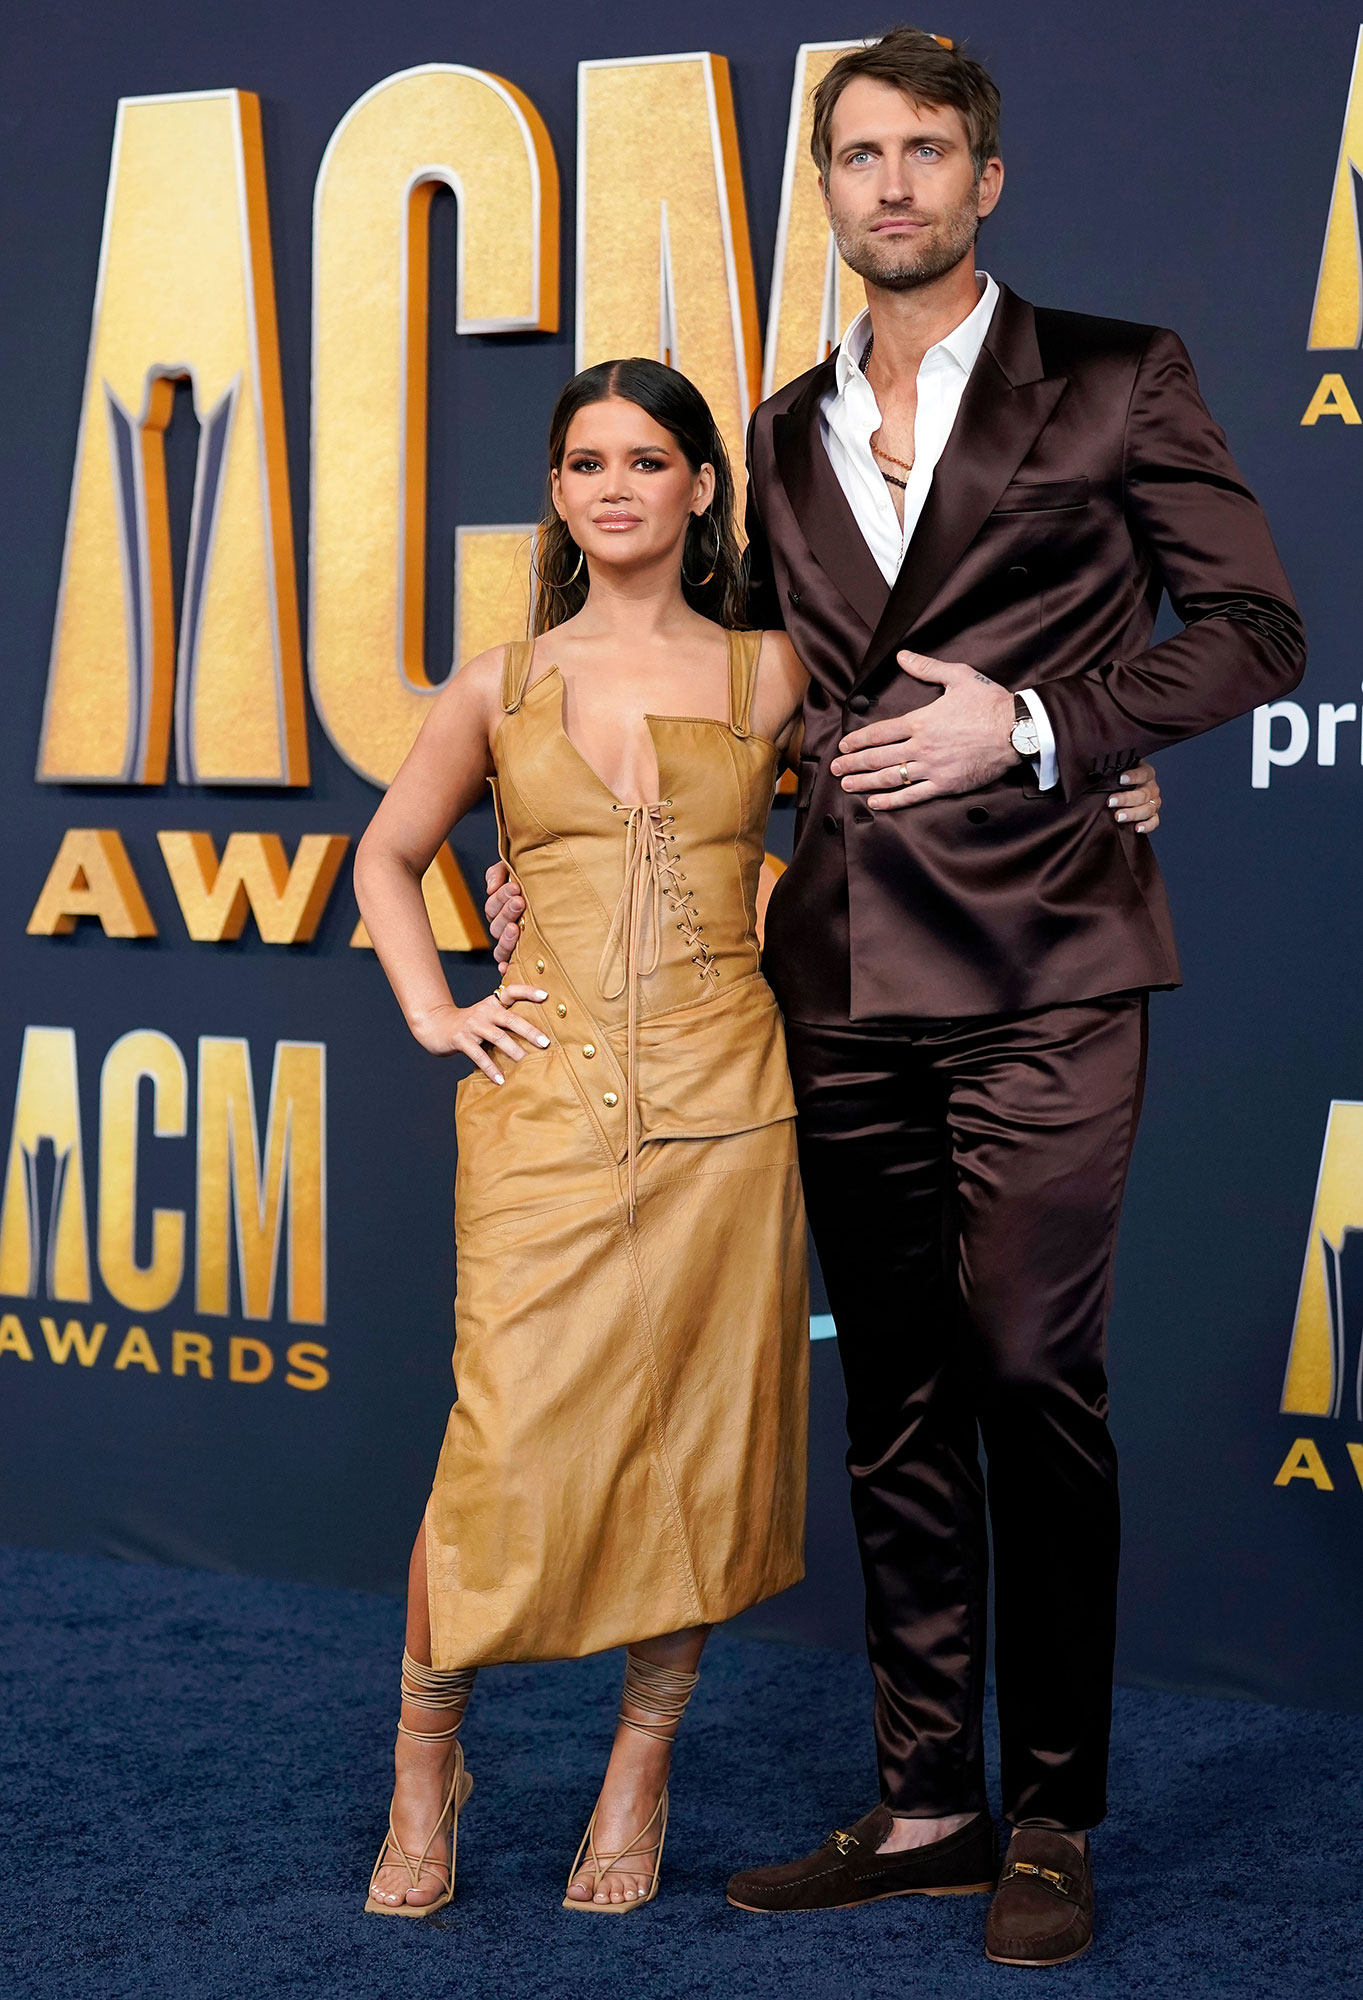 ACM Awards 2022: Hottest Couples on the Red Carpet